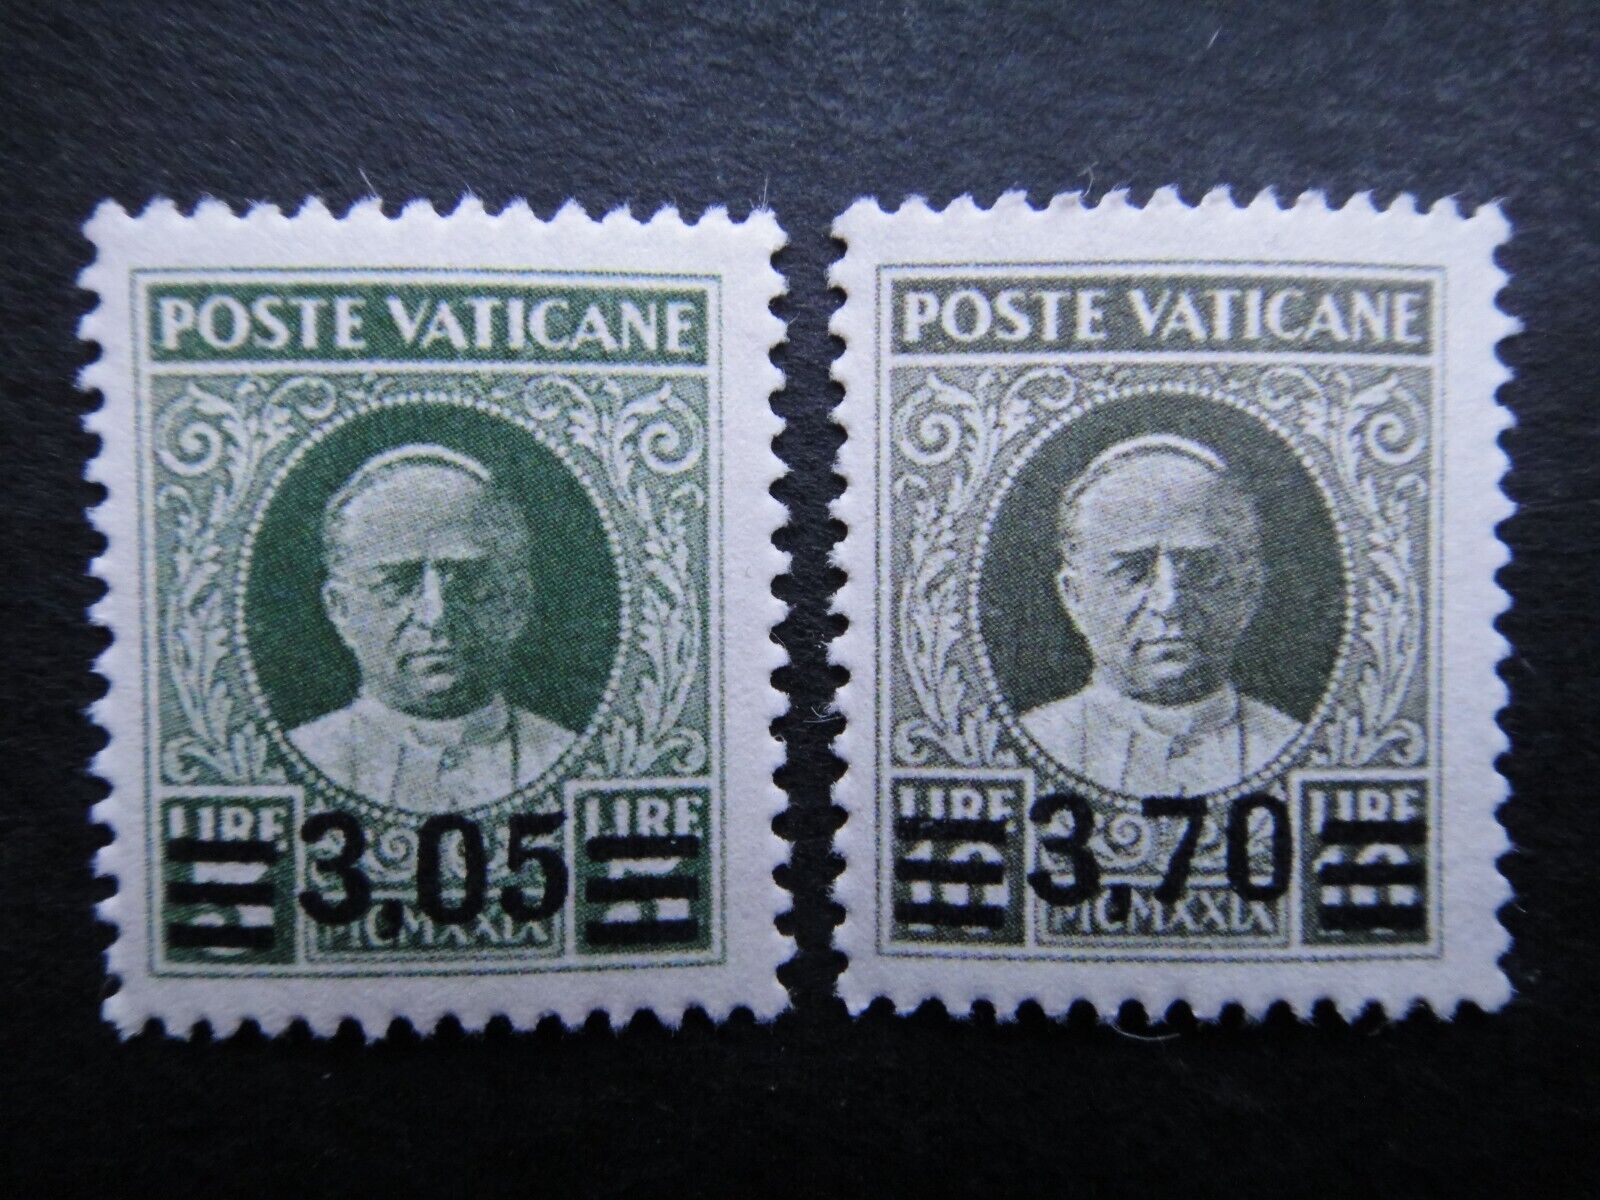 Italy 1934 Stamps MNH Vatican City Provvisoria Airmail